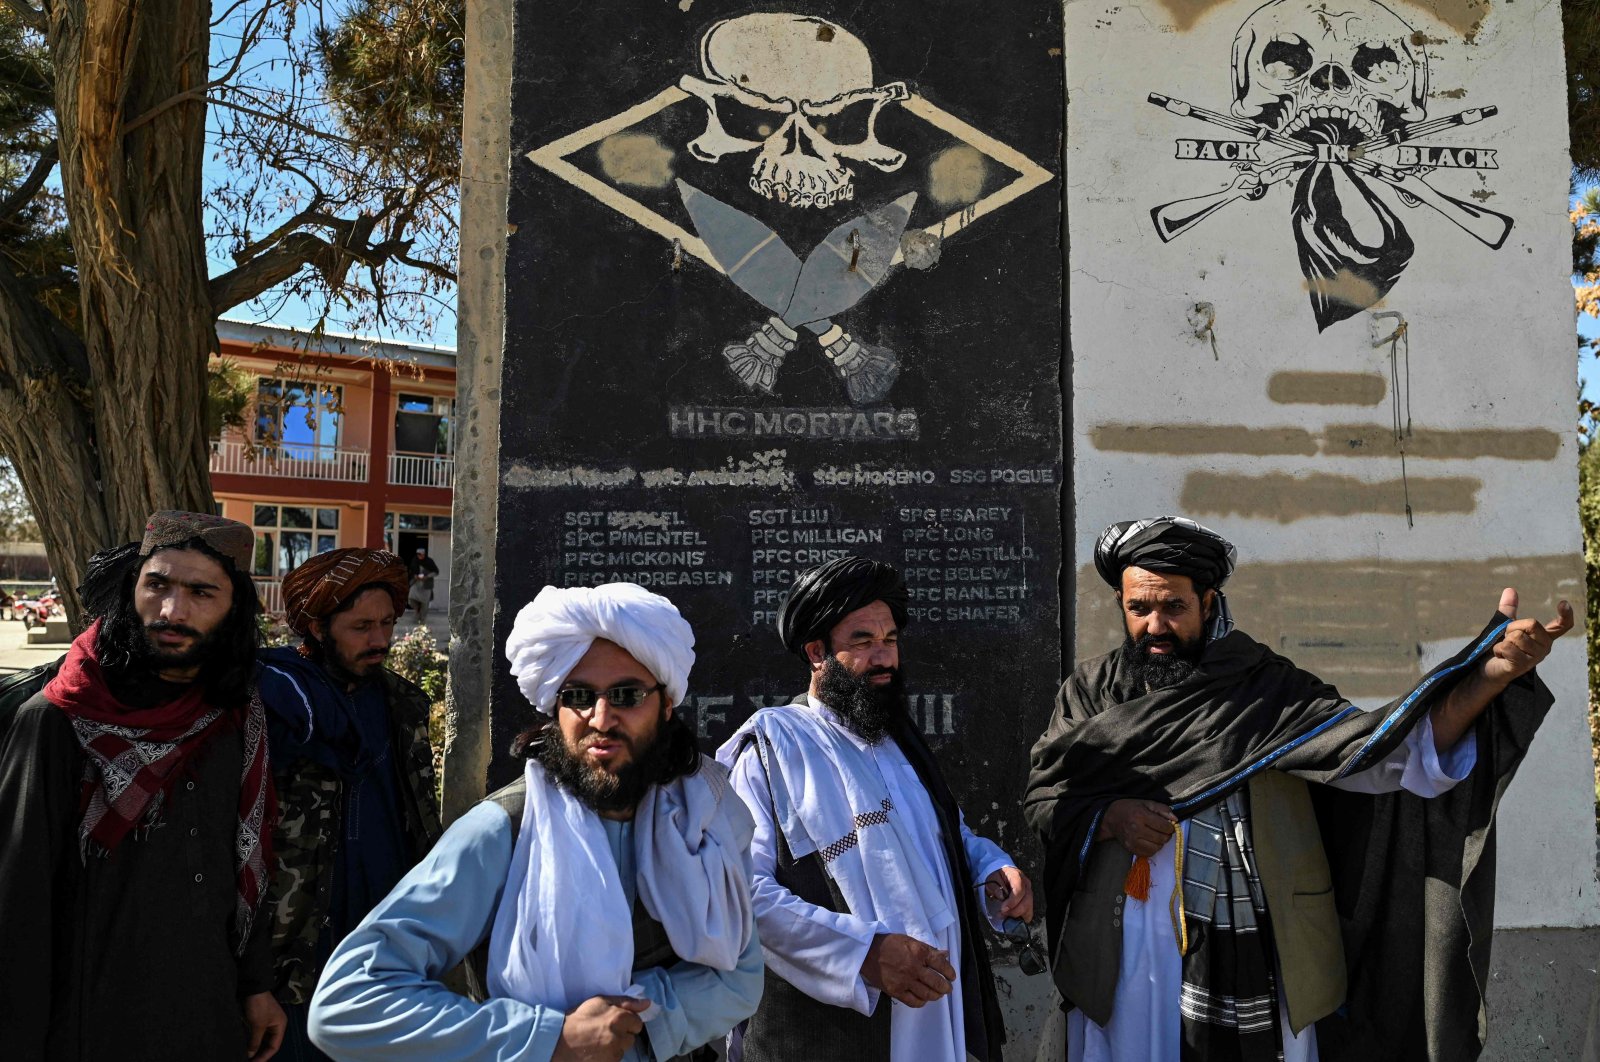 Taliban provincial culture chief Mullah Habibullah Mujahid (R) stands with Taliban members next to a section of a wall of a former U.S. military base with the names of U.S. soldiers, Ghazni, Afghanistan, Nov. 15, 2021. (AFP Photo)